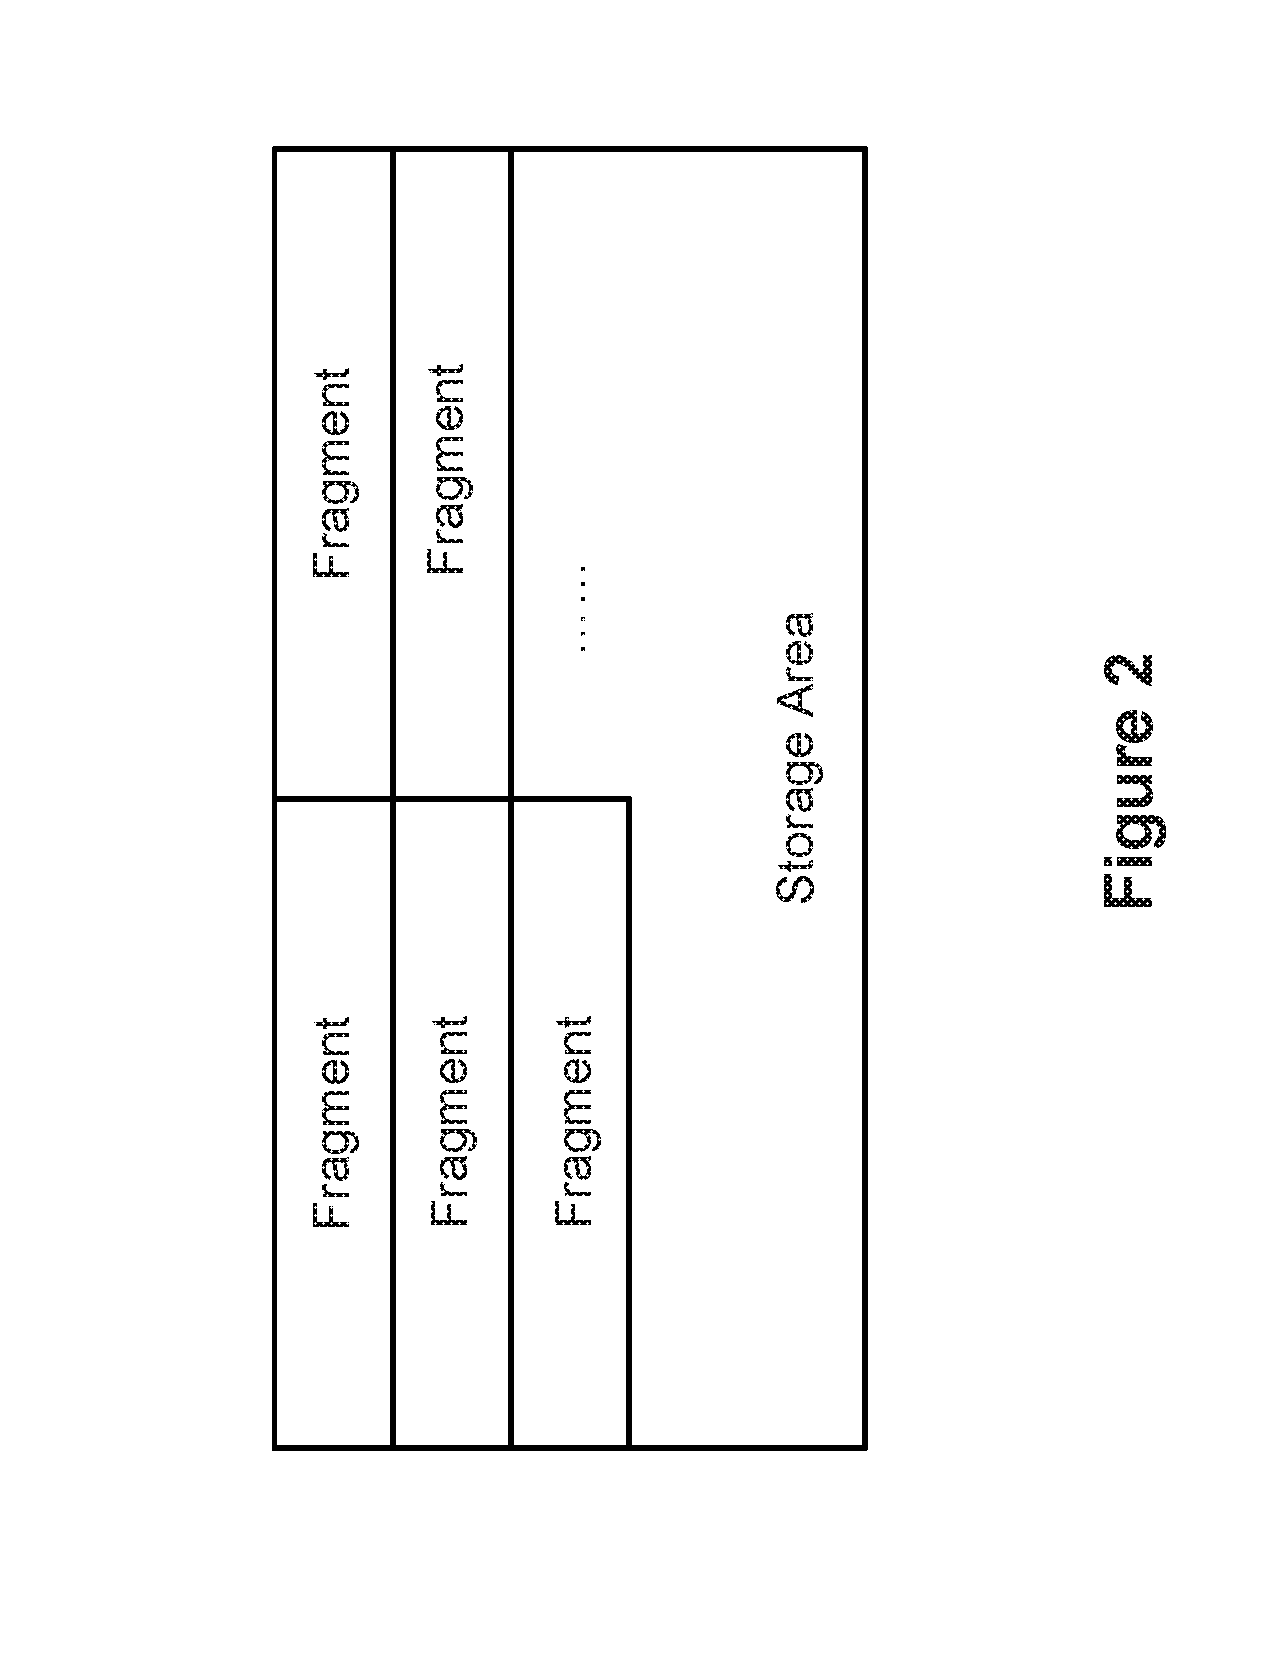 Systems, Devices and Methods for Video Storage